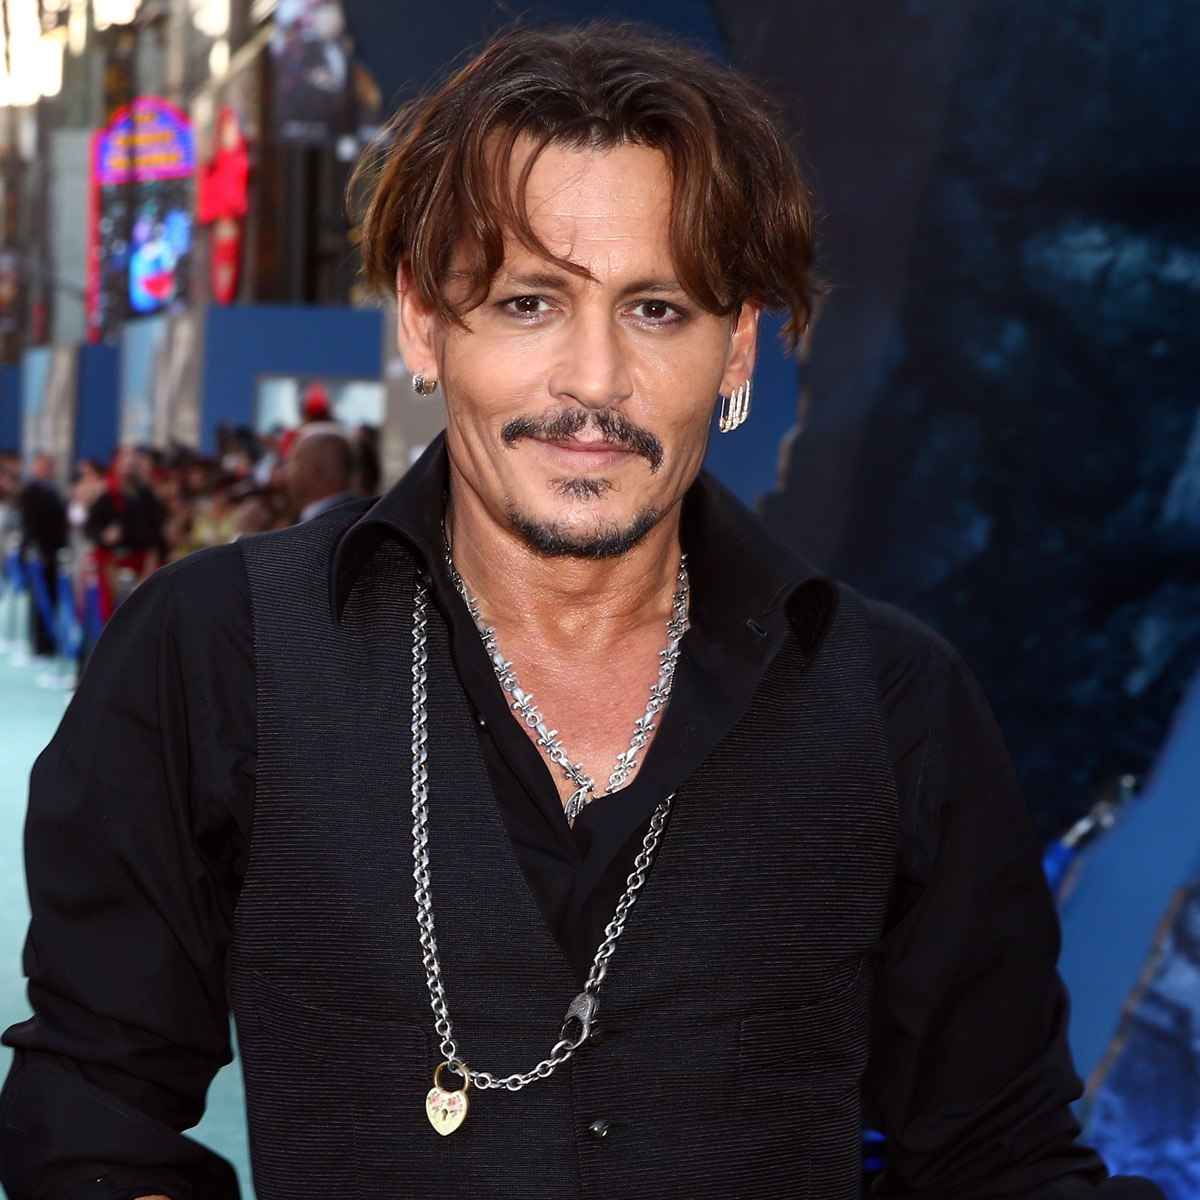 Johnny Depp Announces New Album With Jeff Beck After Amber Heard Trial